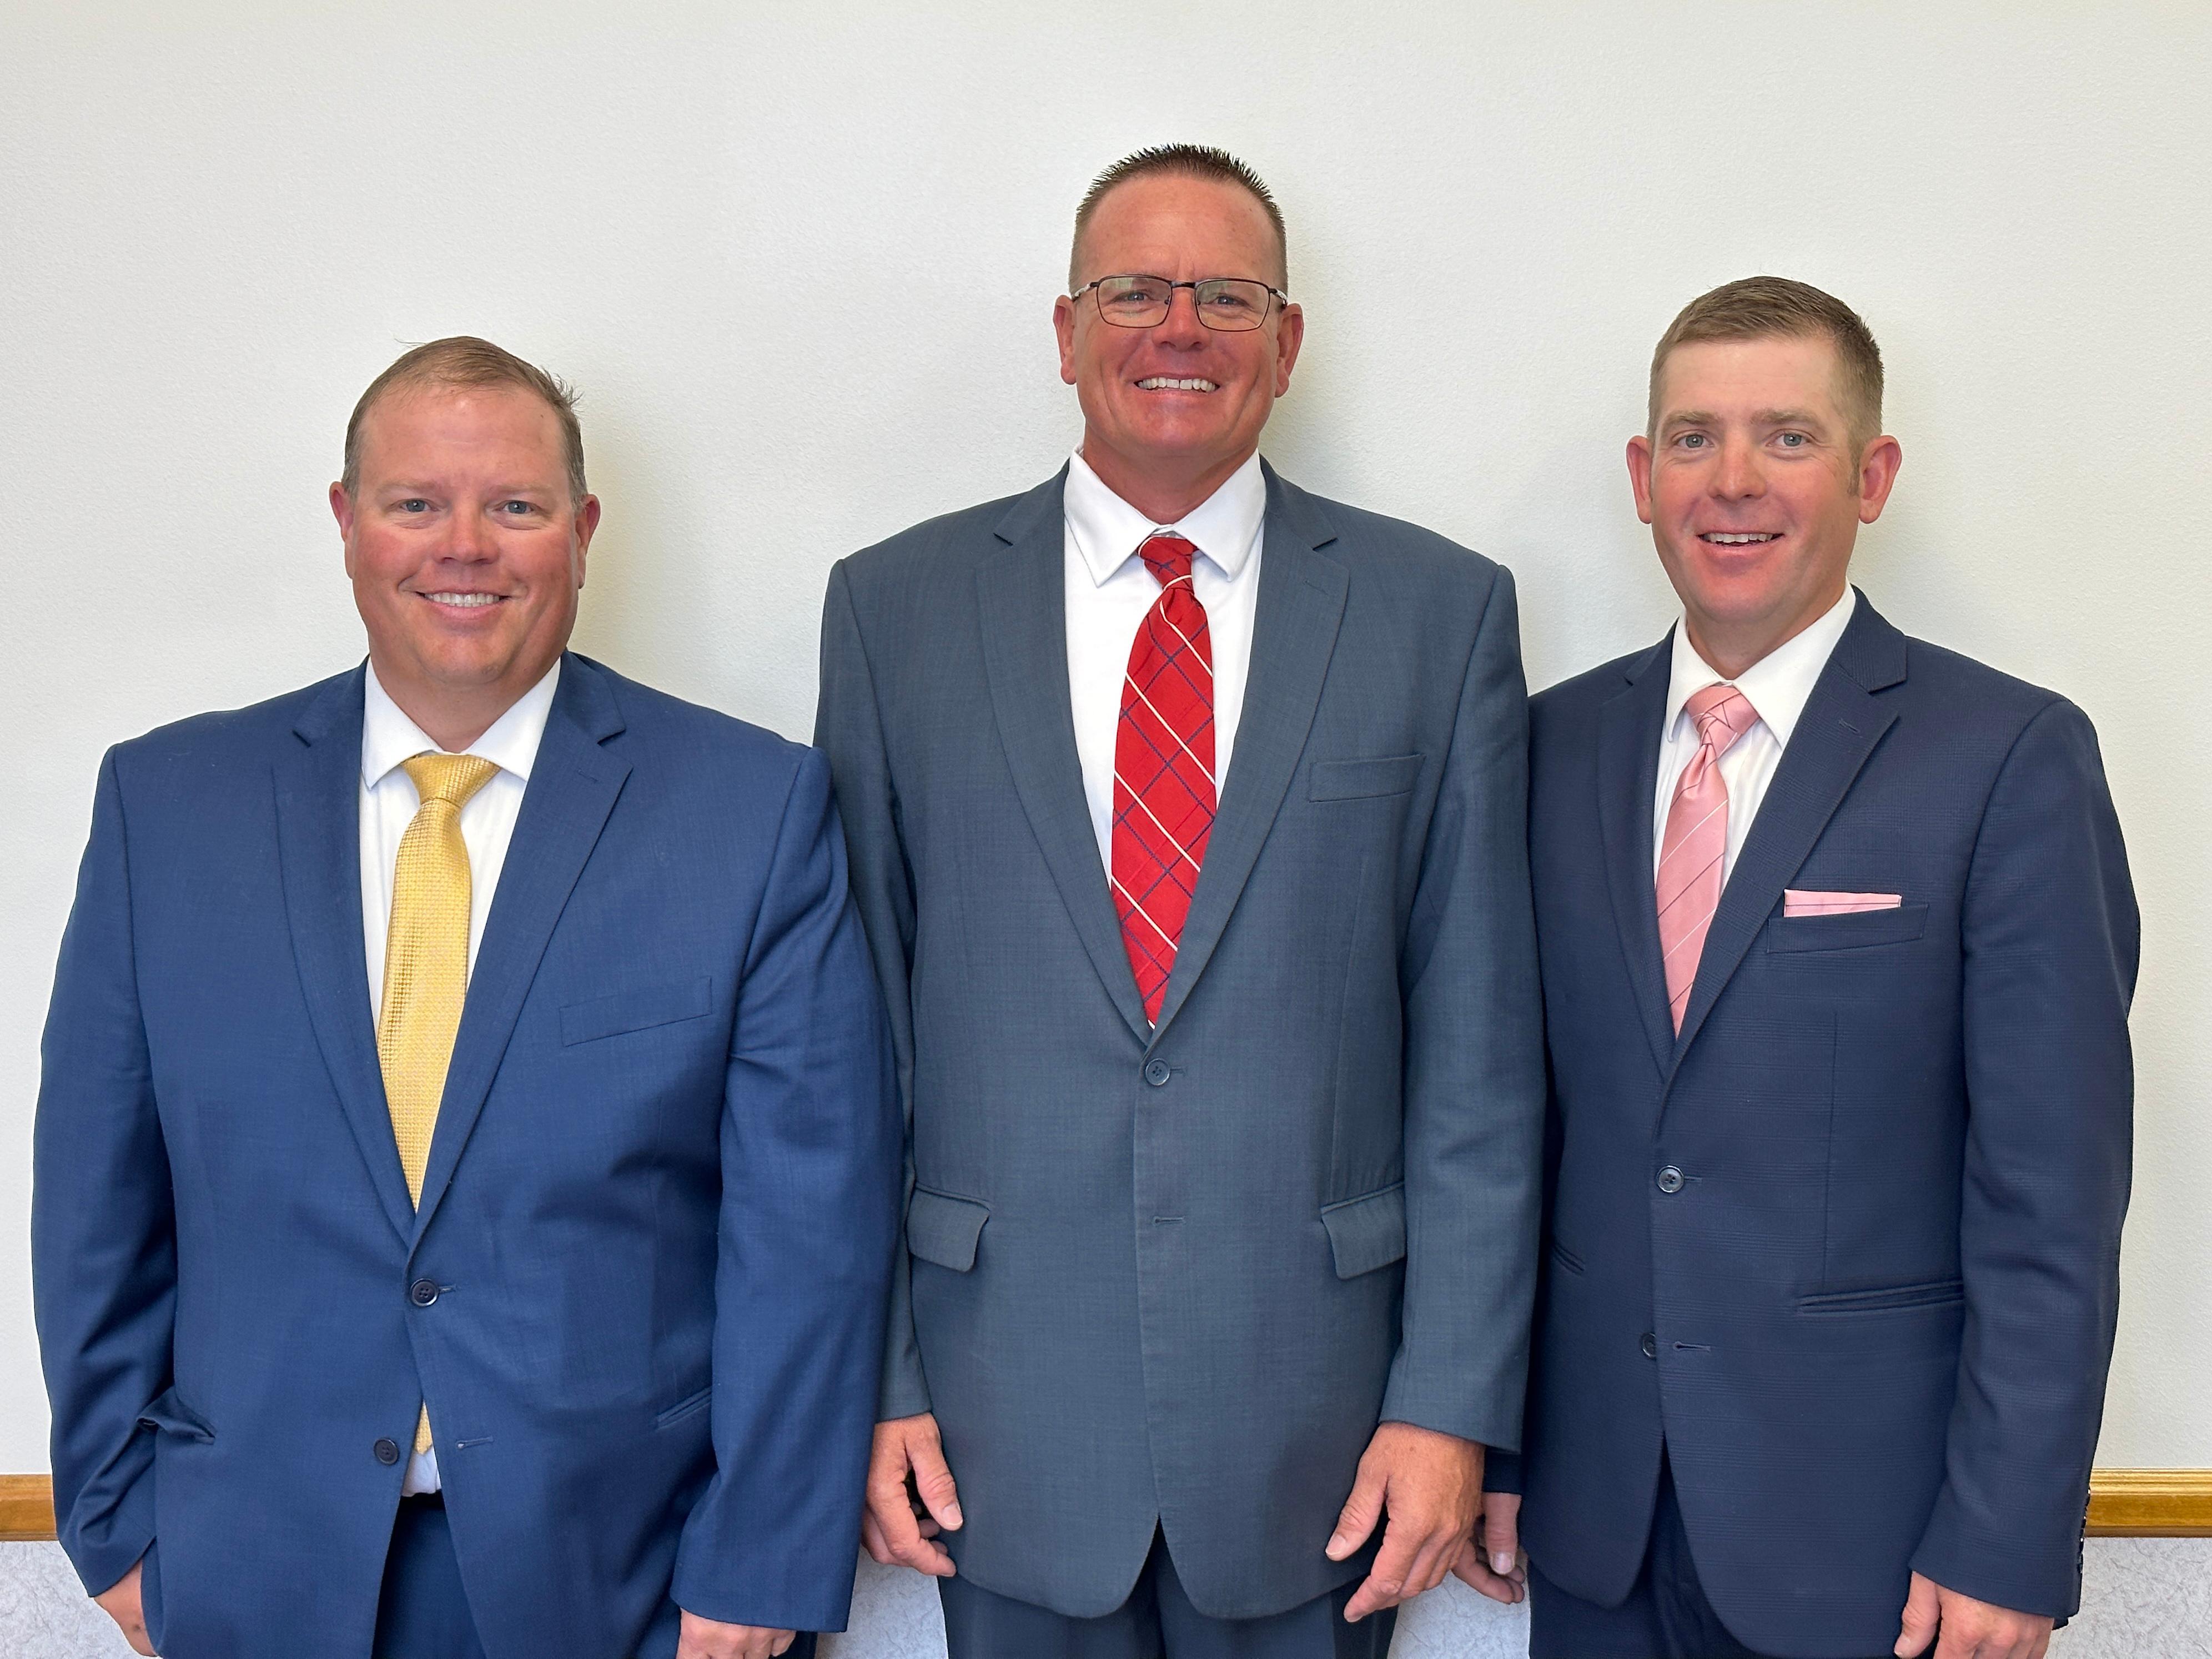 The Chesterfield Ward Bishopric: Bishop (middle): Jason Cooper
First Counselor (left): Tracy Josephson 
Second Counselor (right): Royce Hatch